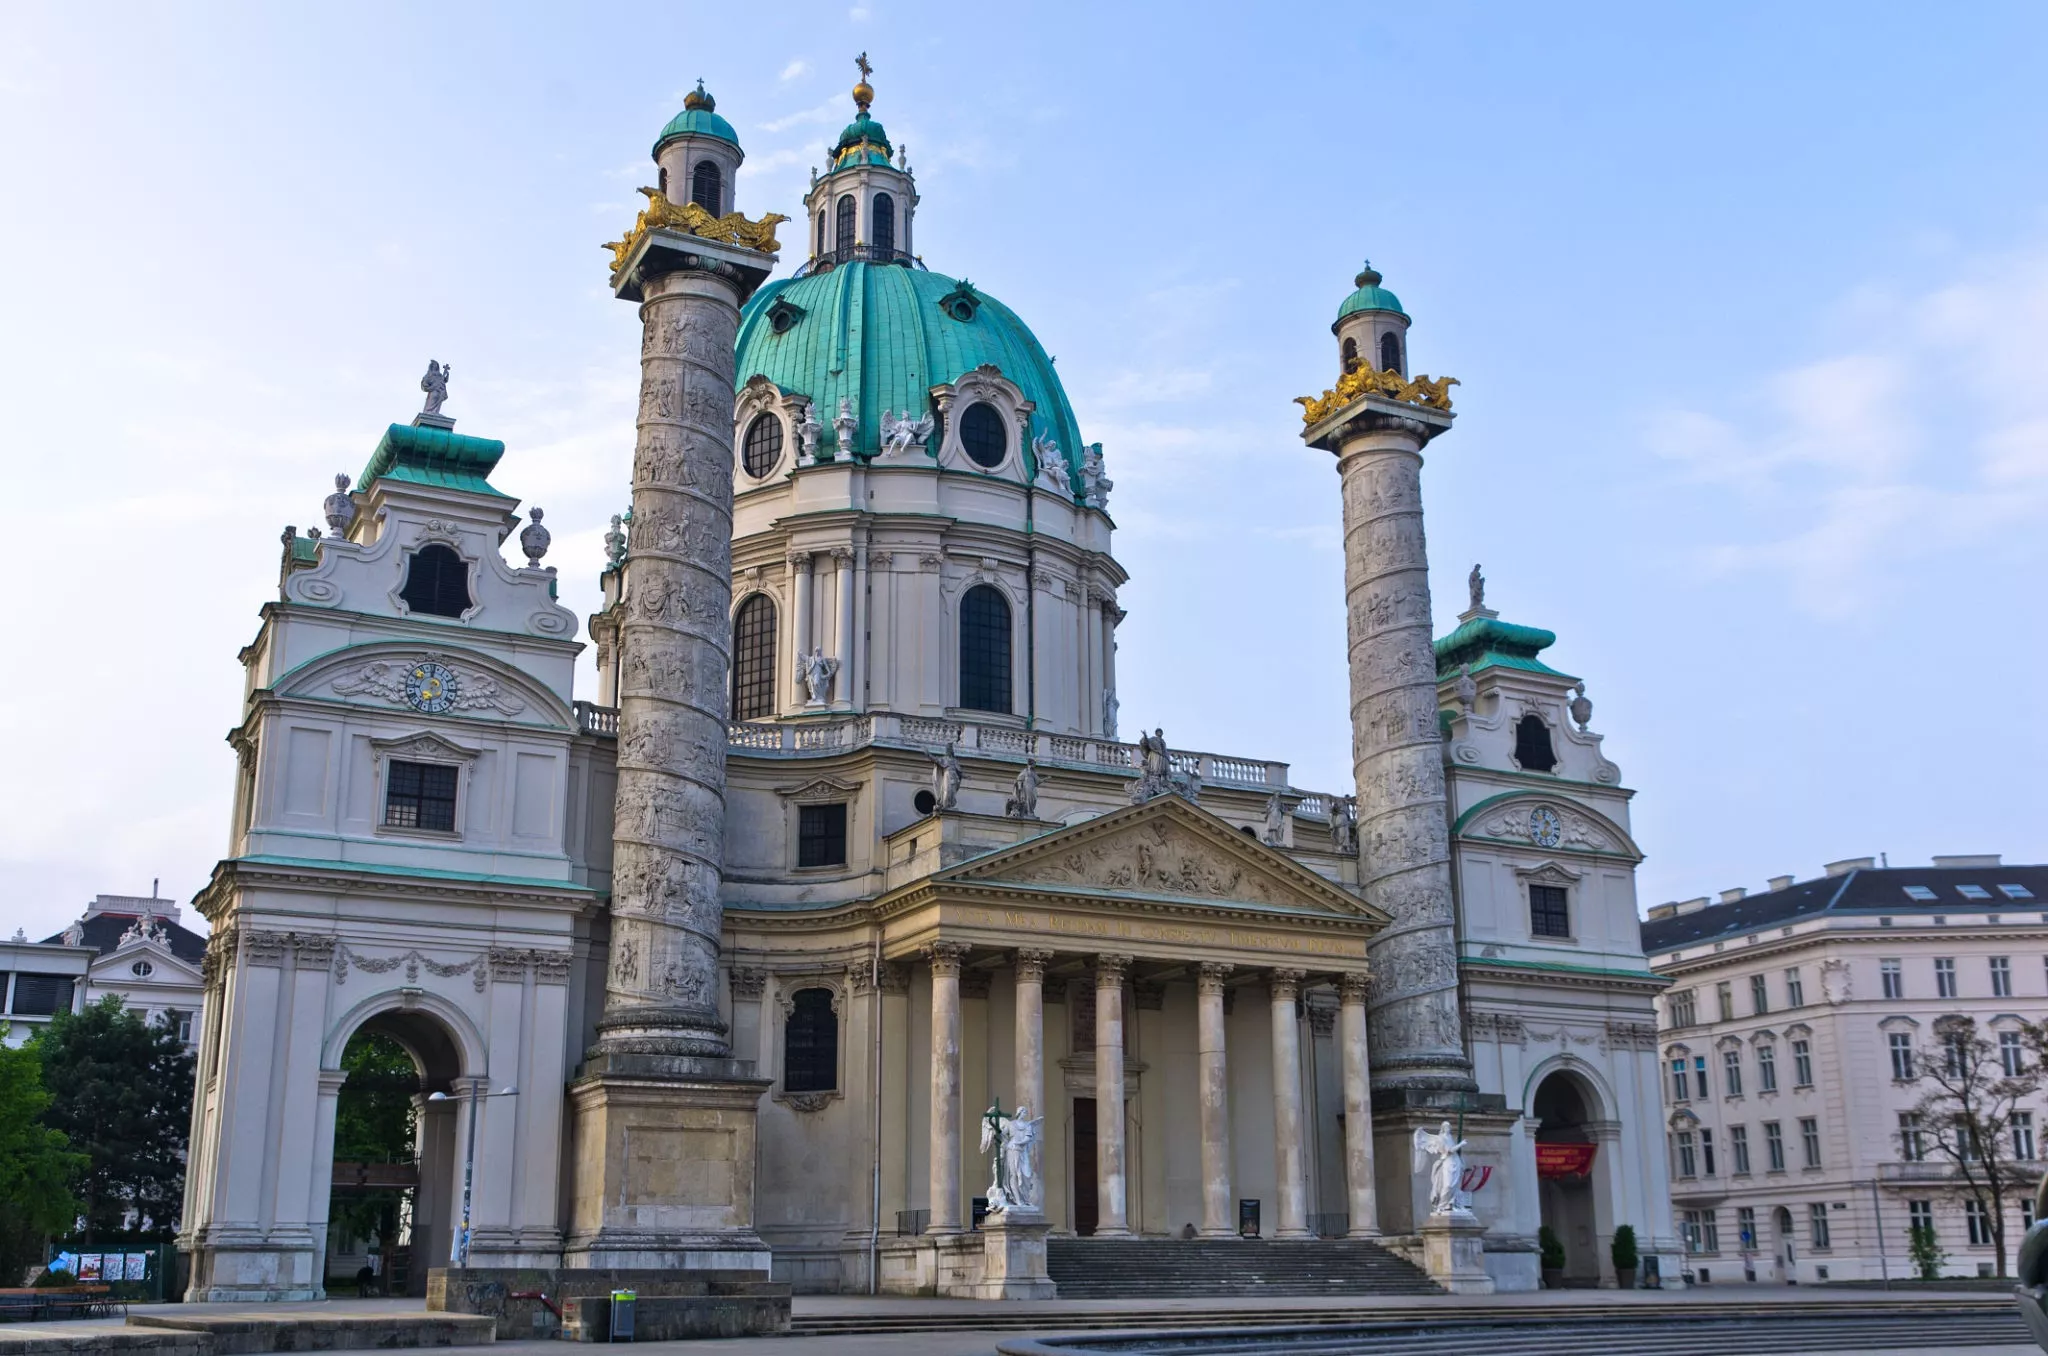 Karlskirche in Austria, Europe  - Rated 4